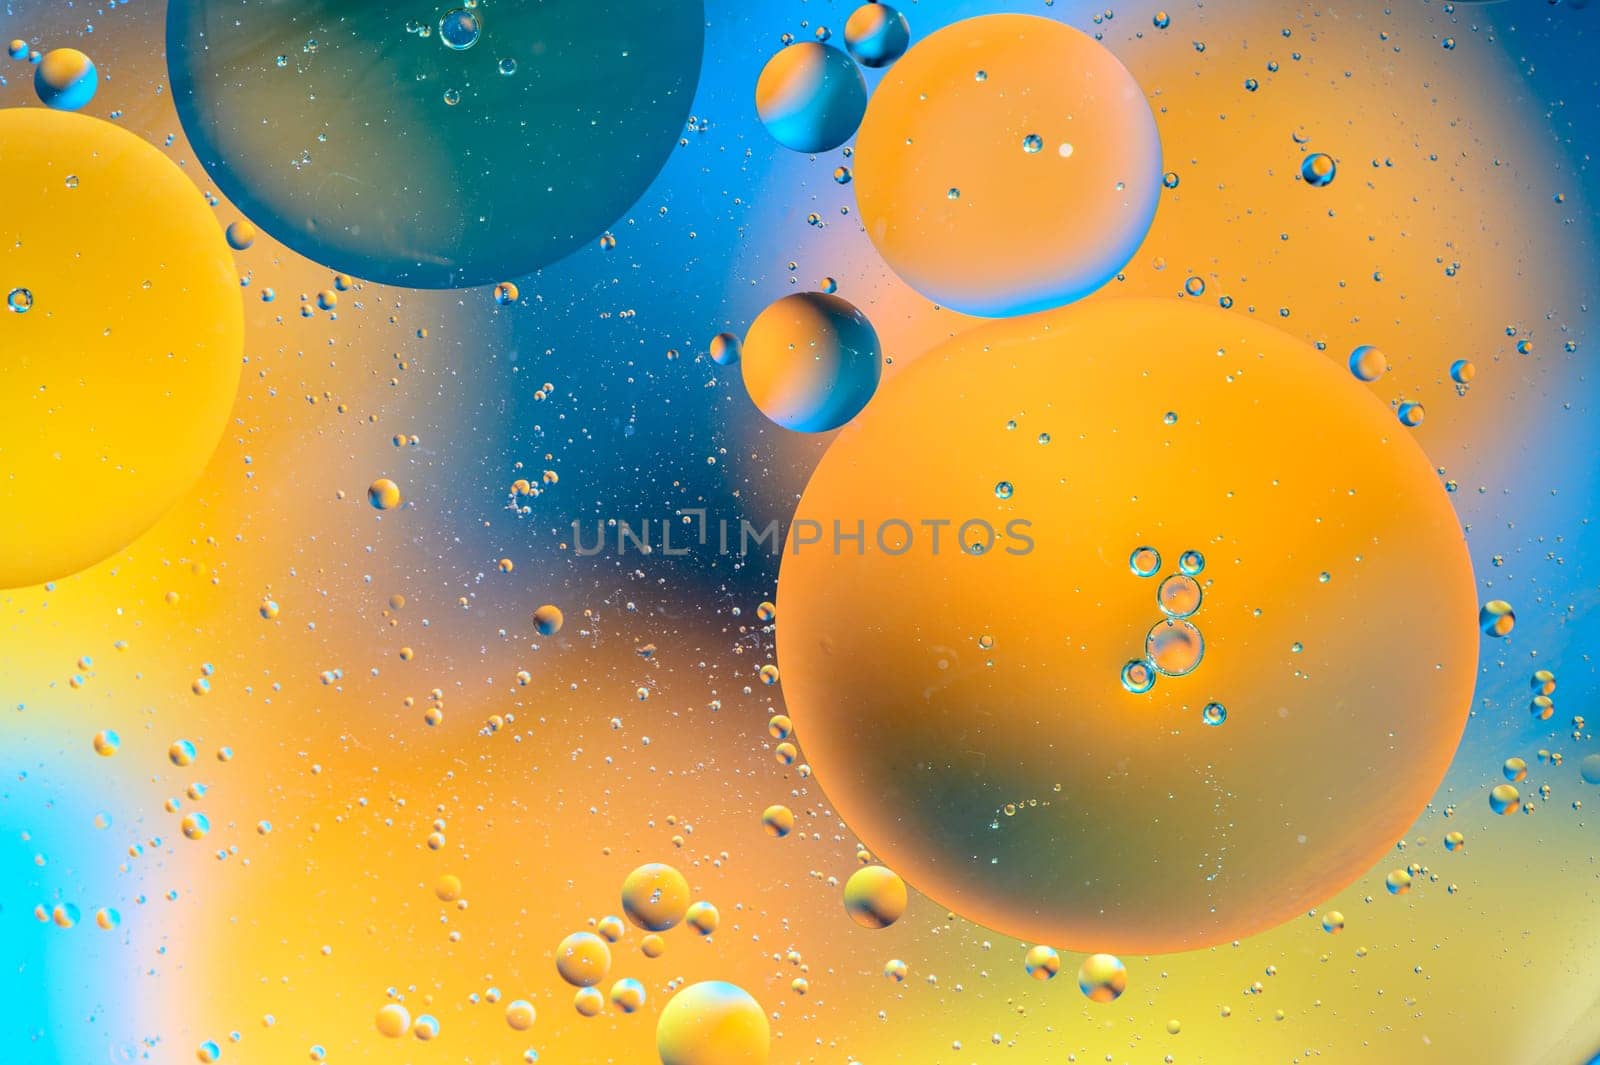 abstract background of multi-colored spots and circles microcosm universe galaxy 18 by Mixa74